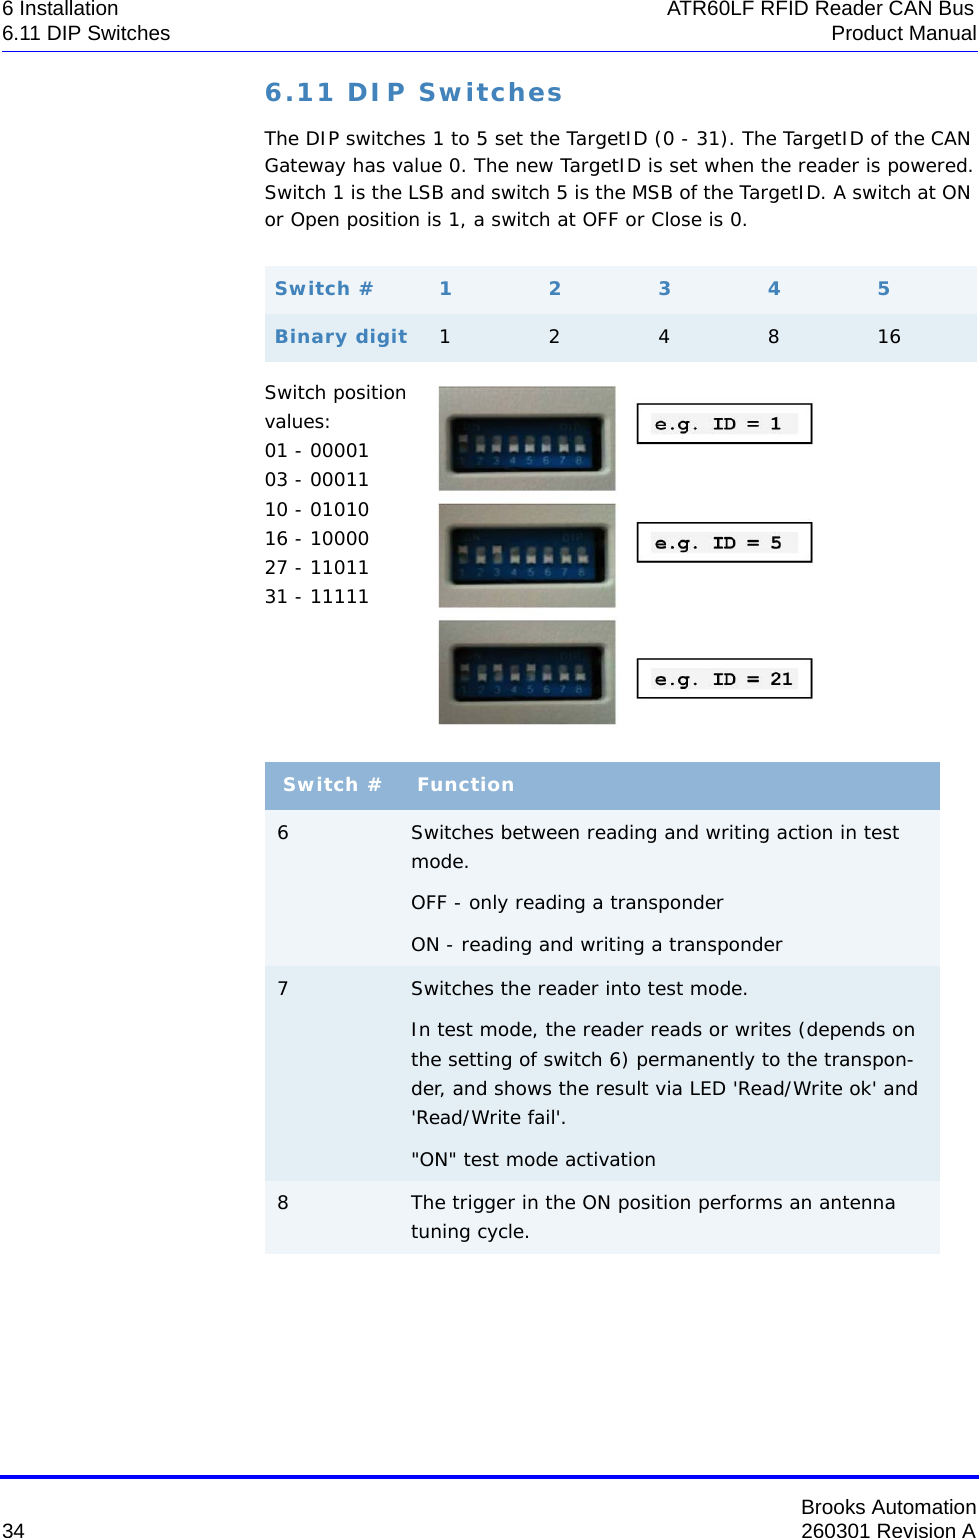 Brooks Automation34 260301 Revision A6 Installation ATR60LF RFID Reader CAN Bus6.11 DIP Switches Product Manual6.11 DIP SwitchesThe DIP switches 1 to 5 set the TargetID (0 - 31). The TargetID of the CAN Gateway has value 0. The new TargetID is set when the reader is powered. Switch 1 is the LSB and switch 5 is the MSB of the TargetID. A switch at ON or Open position is 1, a switch at OFF or Close is 0.Switch position values: 01 - 00001 03 - 00011 10 - 01010 16 - 10000 27 - 11011 31 - 11111Switch # 12345Binary digit 124816Switch # Function6Switches between reading and writing action in test mode.OFF - only reading a transponderON - reading and writing a transponder7Switches the reader into test mode.In test mode, the reader reads or writes (depends on the setting of switch 6) permanently to the transpon-der, and shows the result via LED &apos;Read/Write ok&apos; and &apos;Read/Write fail&apos;.&quot;ON&quot; test mode activation8The trigger in the ON position performs an antenna tuning cycle.